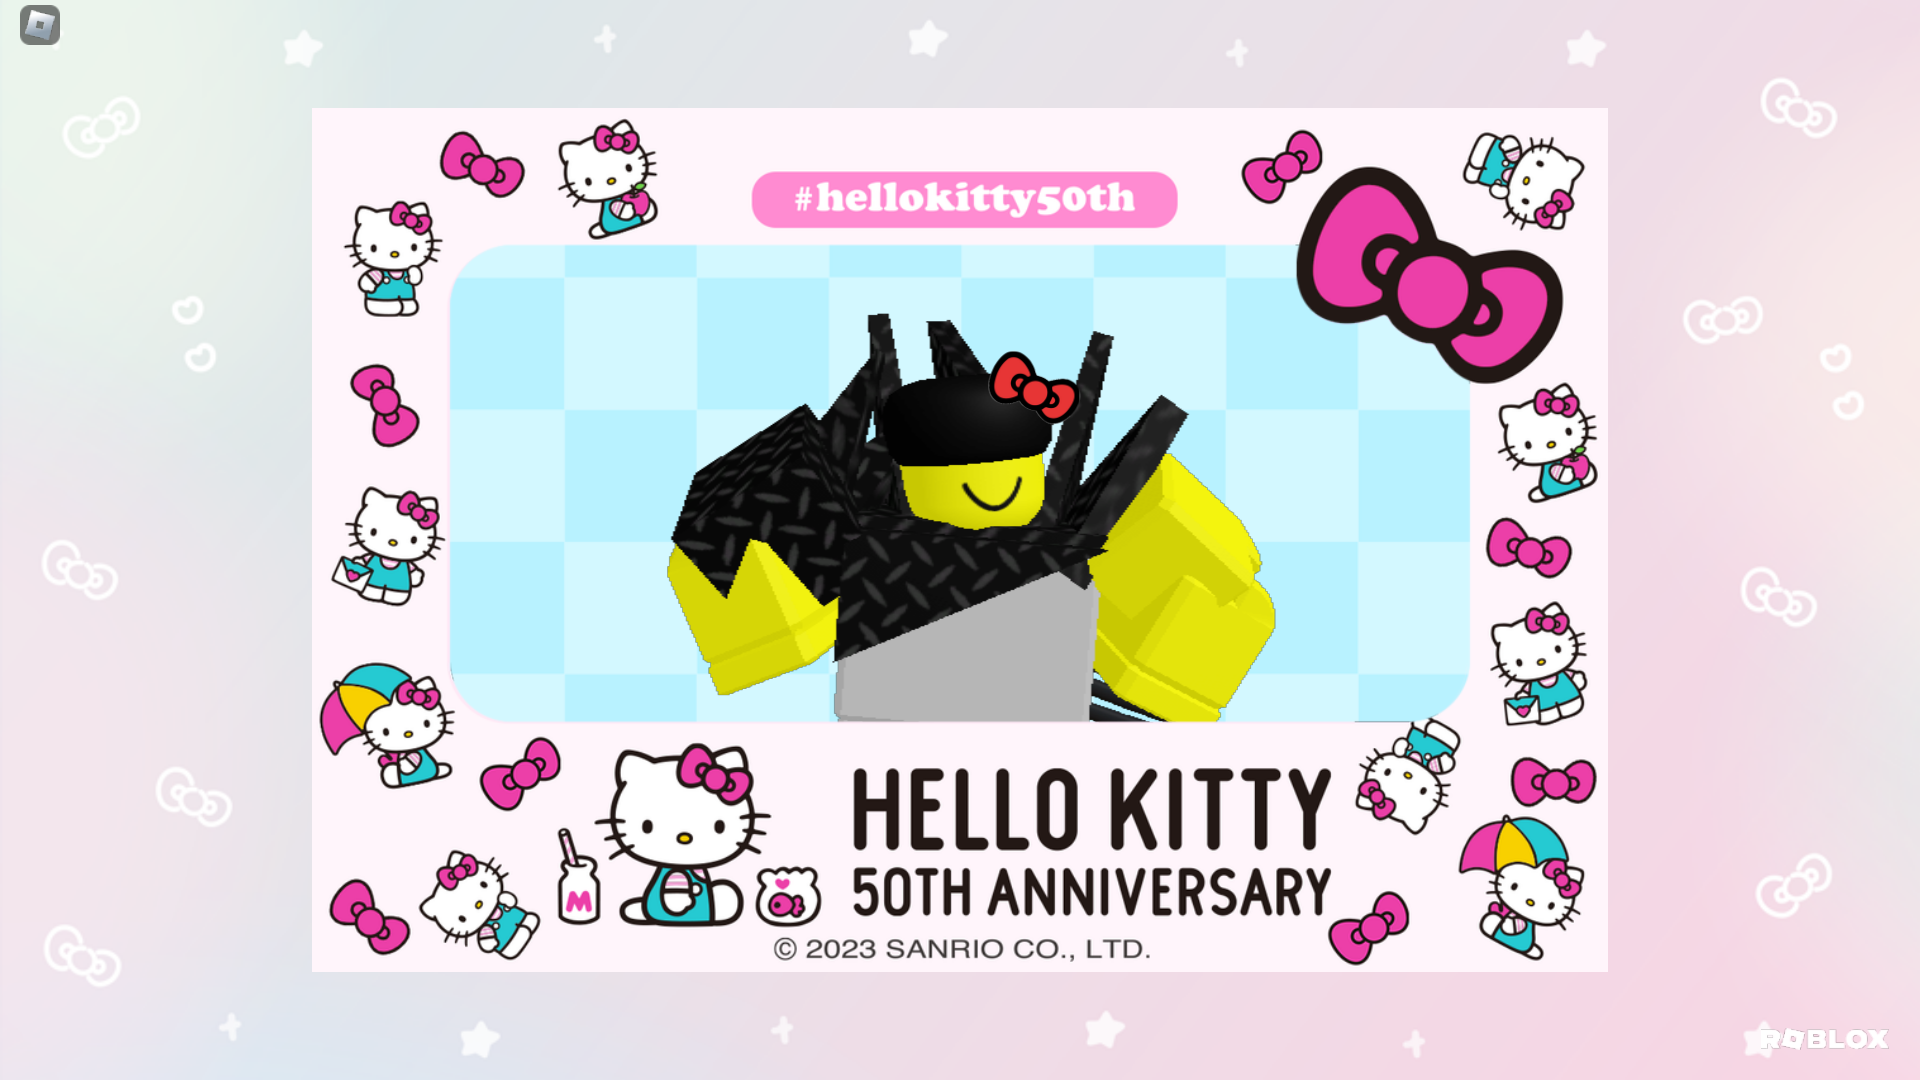 Hello Kitty 50th Anniversary featuring Shard from Roblox Battle as a Roblox avatar with the trans colored katanas and Hello Kitty's hair bow.